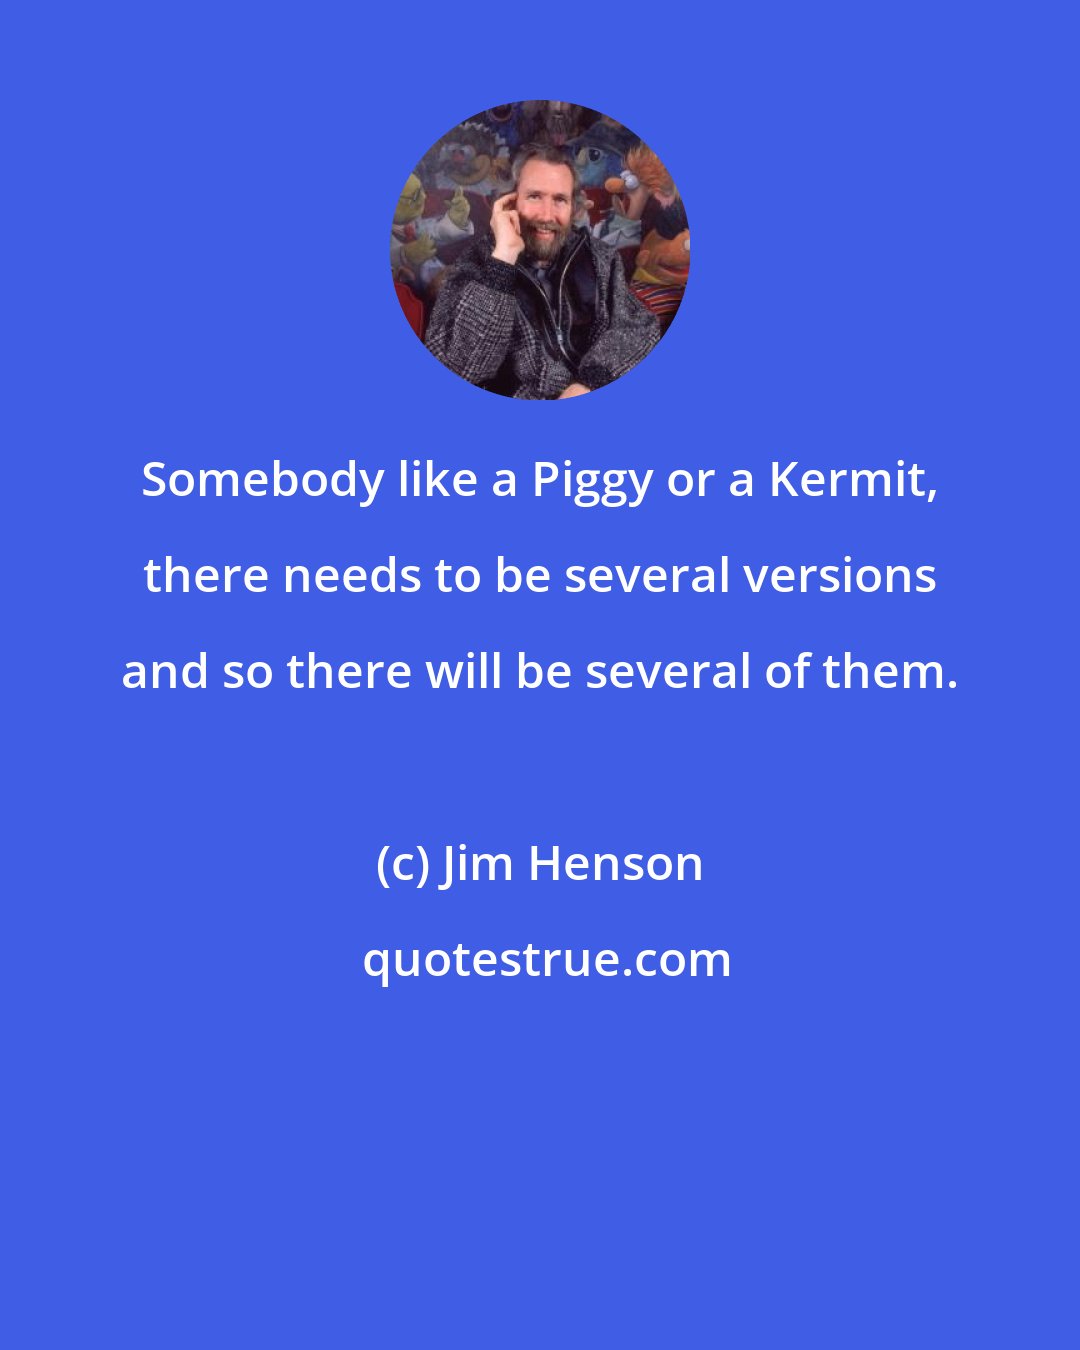 Jim Henson: Somebody like a Piggy or a Kermit, there needs to be several versions and so there will be several of them.